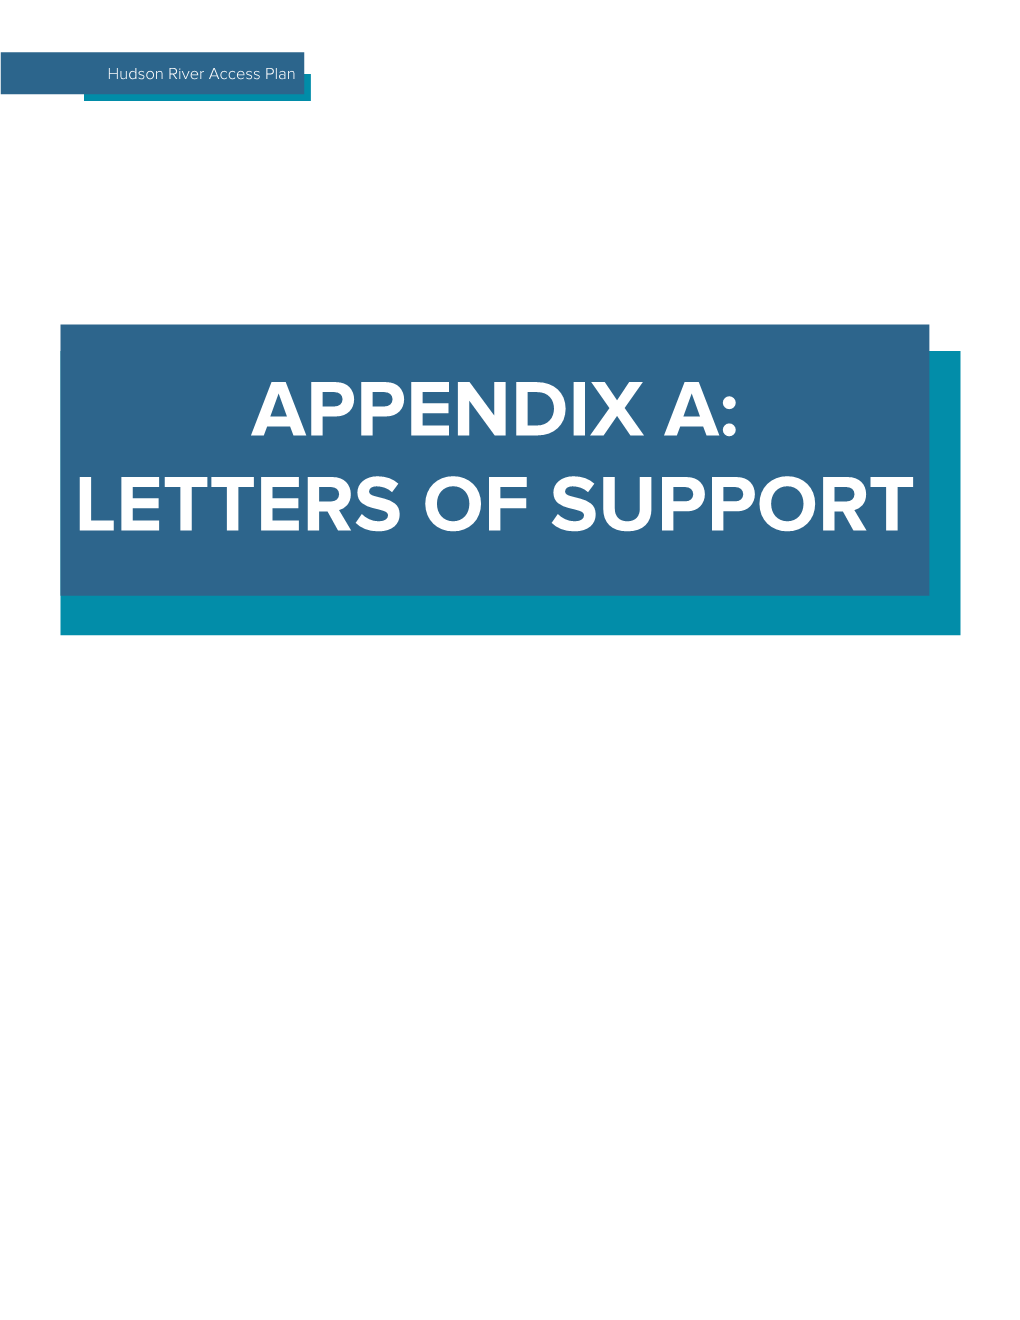 Appendix A: Letters of Support